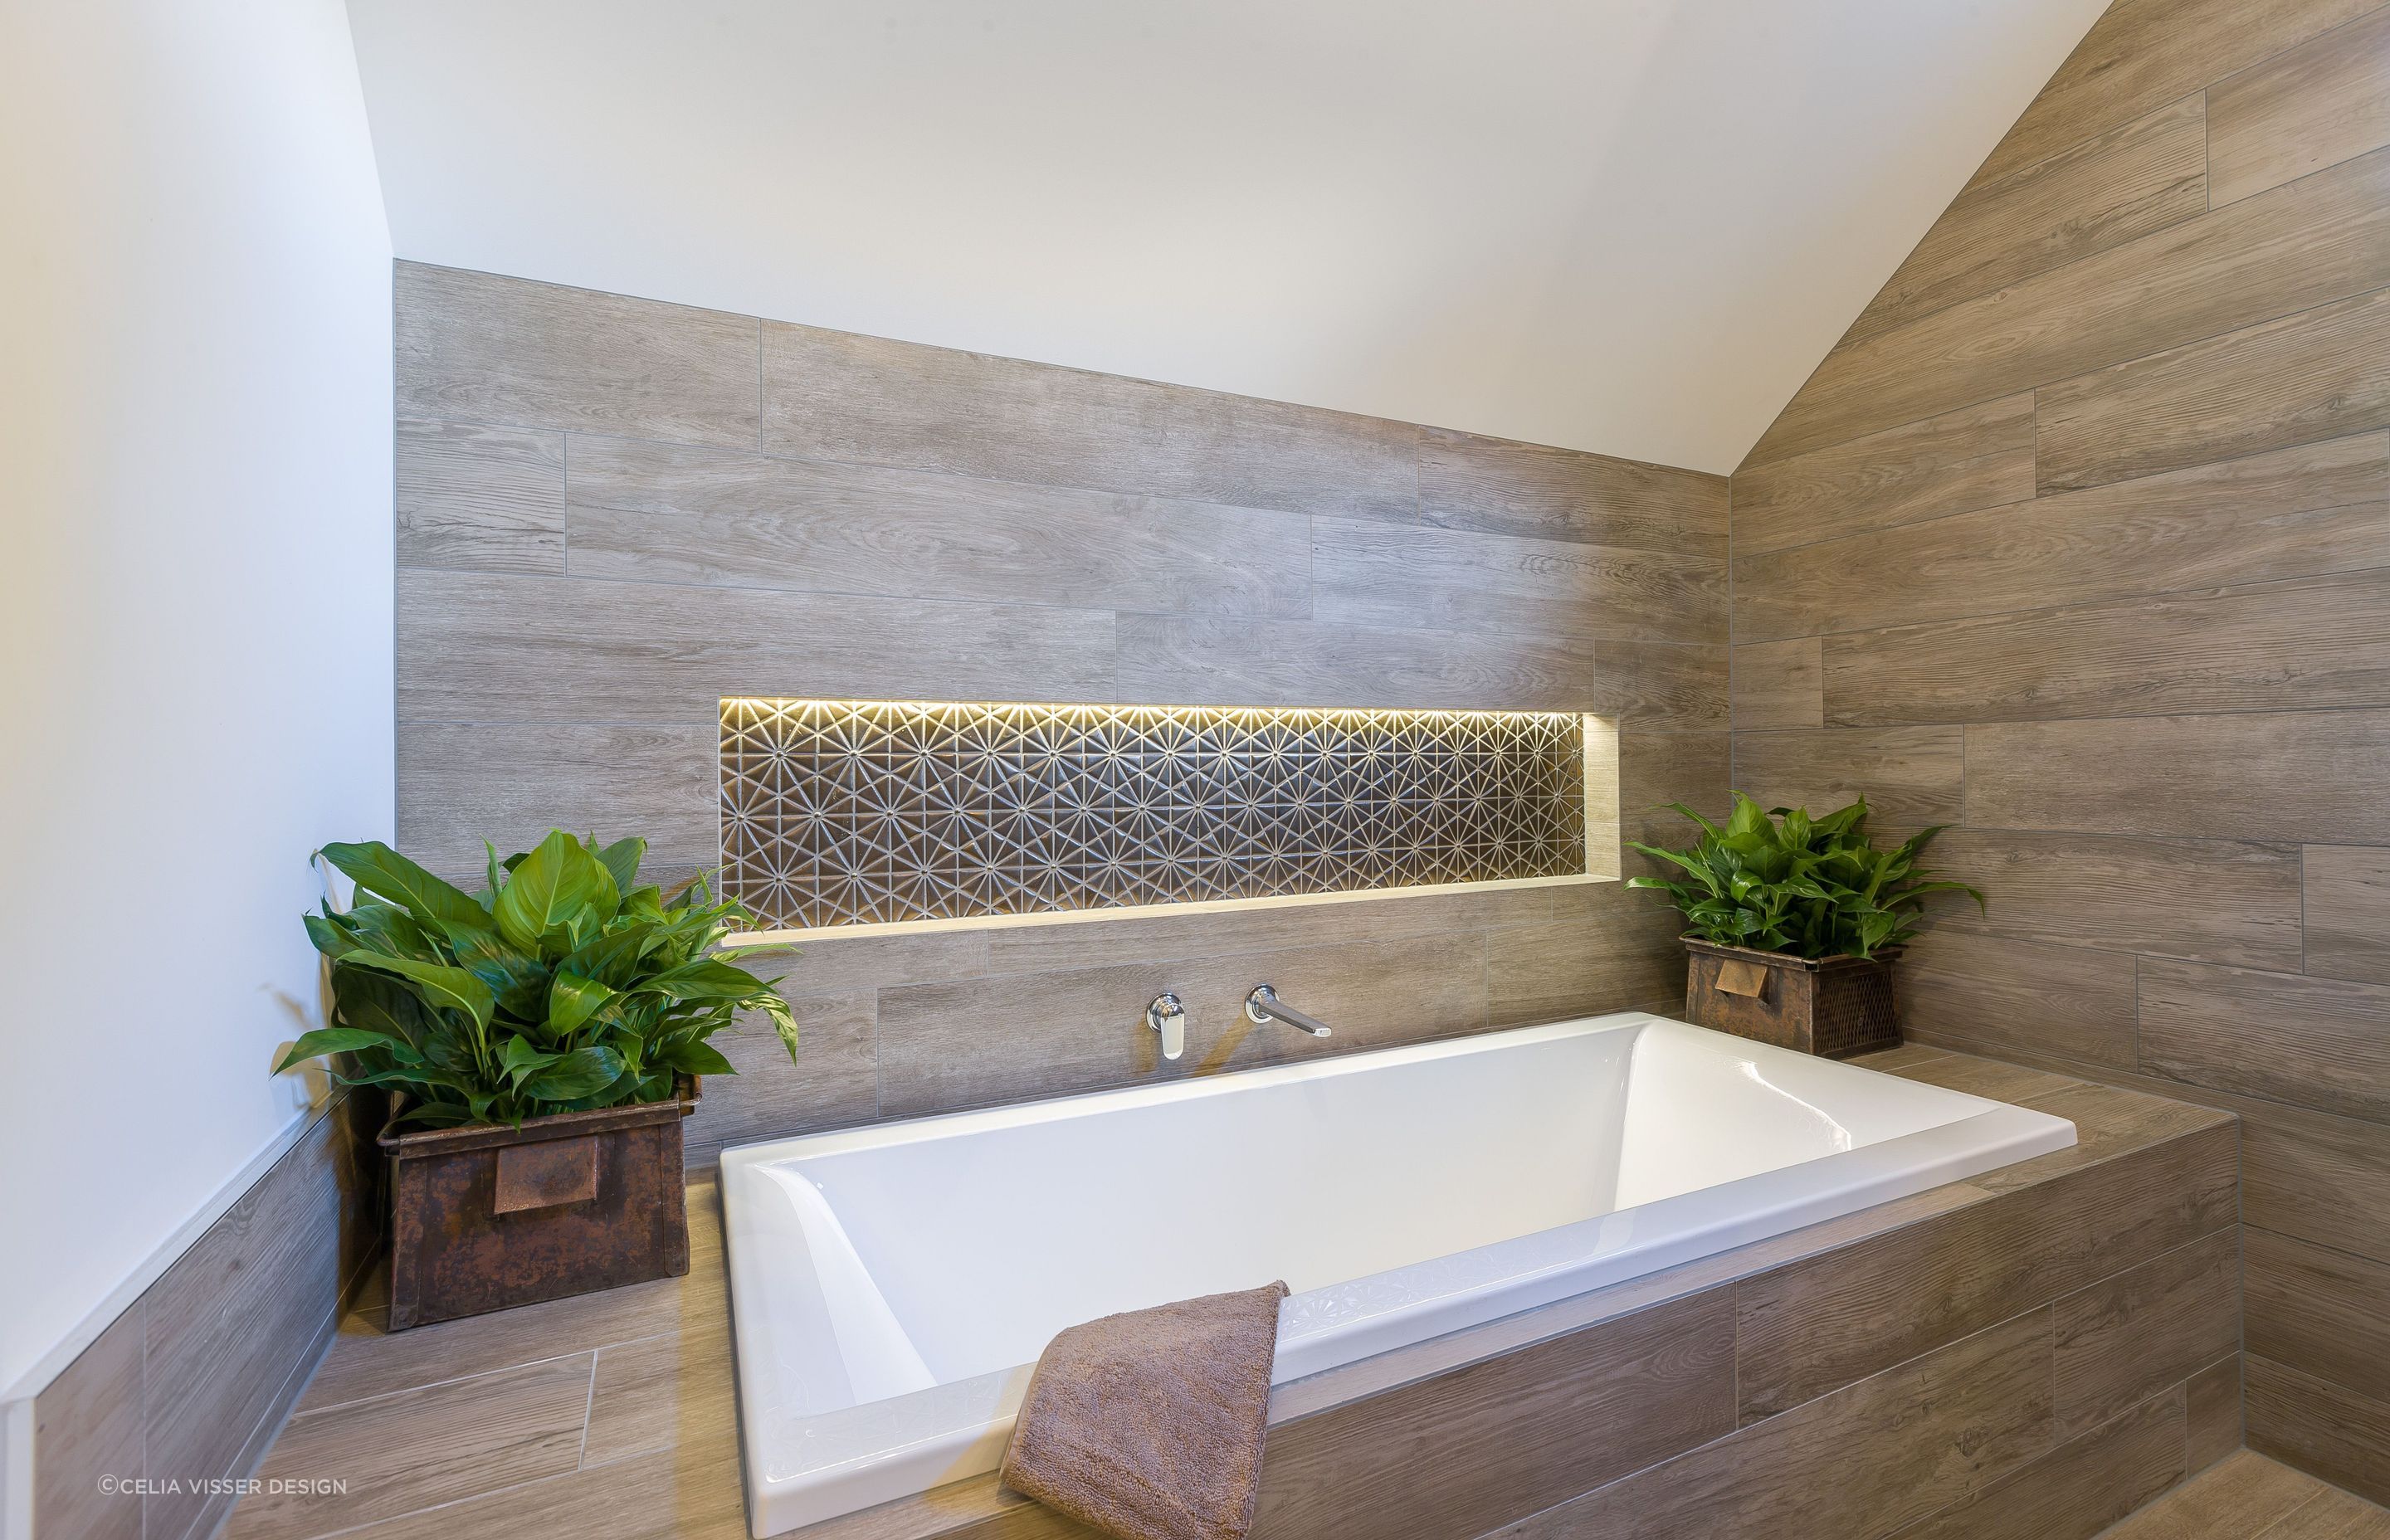 The bathroom niche steals the show with superb lighting and tiling in this guest bathroom in Karaka.